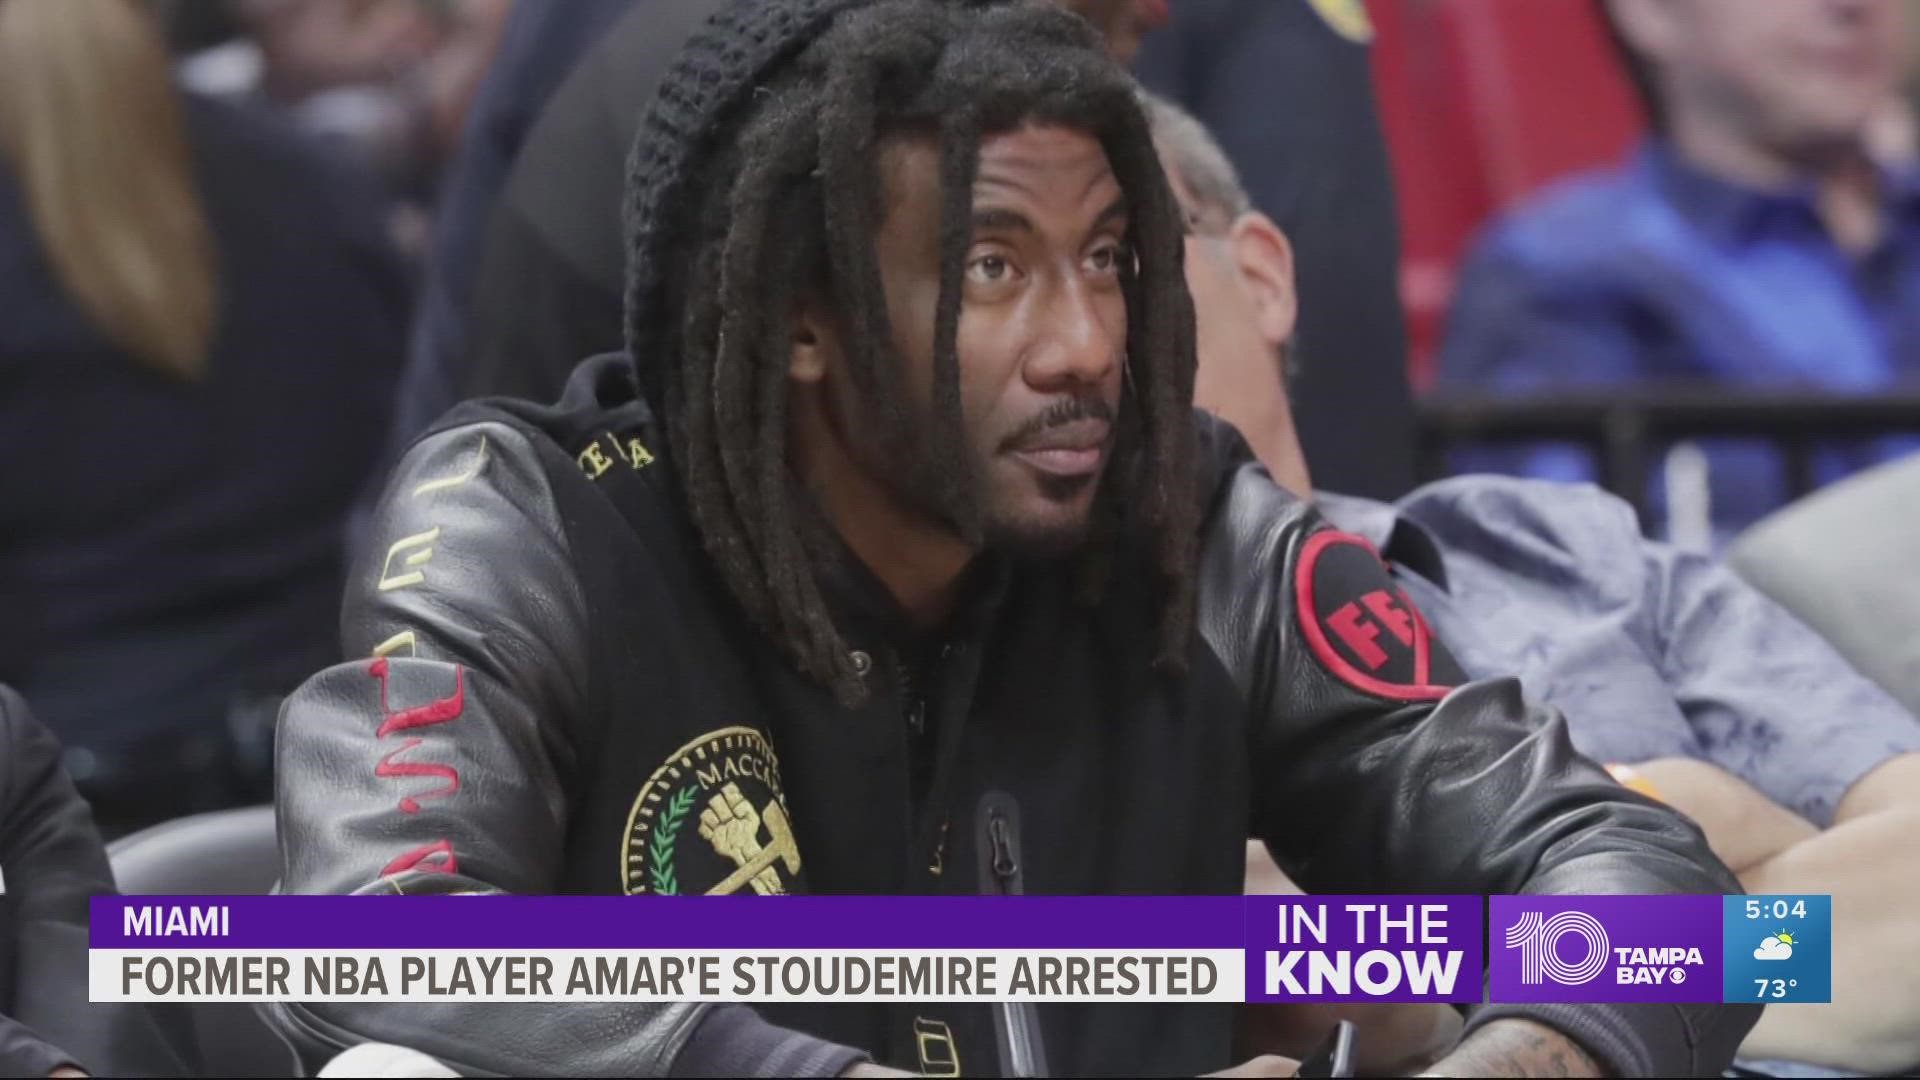 Court records show Stoudemire and New York Knicks star was arrested early Sunday.